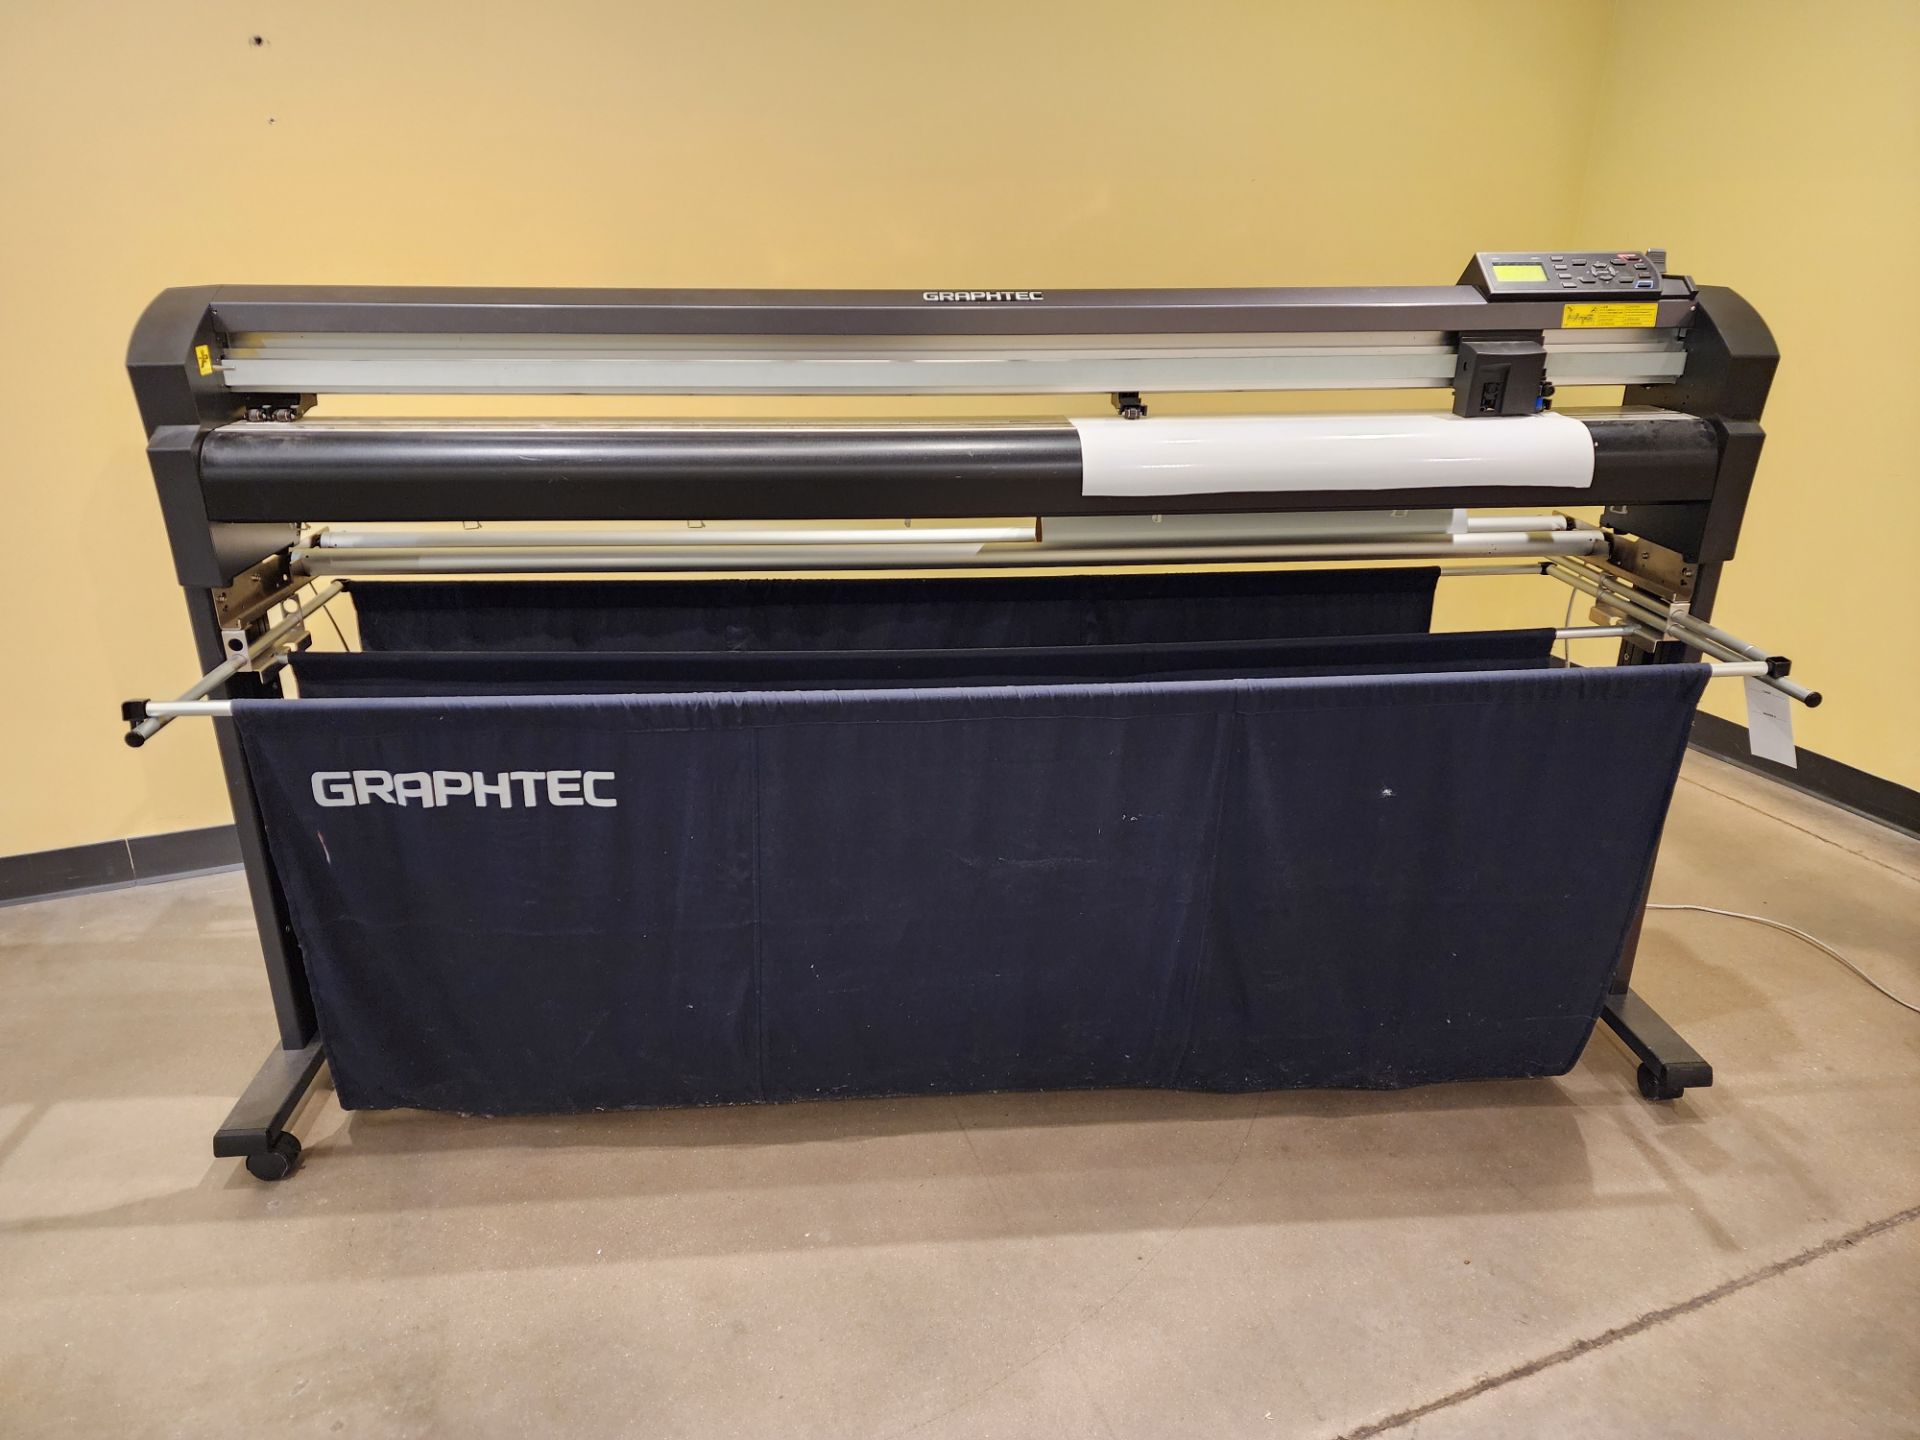 Graphtec Model FC8000-160 Cutting Plotter, S/N 20120301 A20331412 - Image 4 of 9